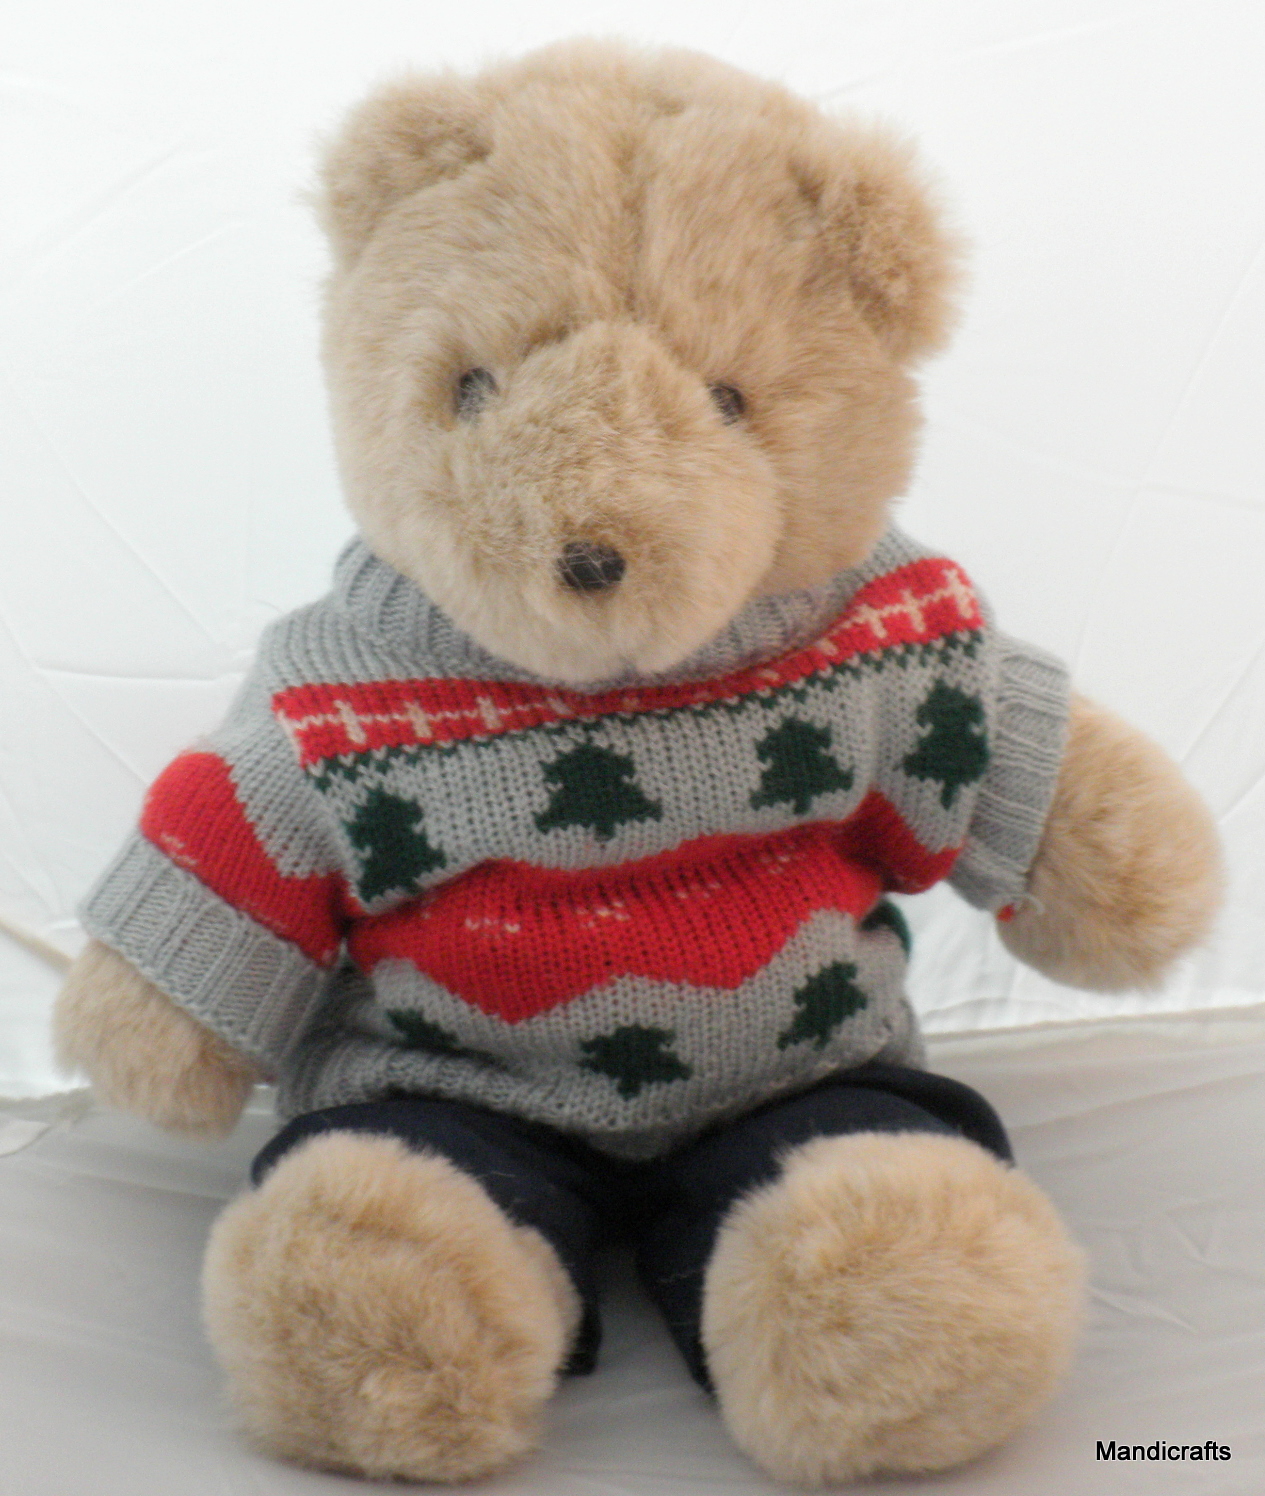 Mandicrafts News & Views - Teddy Bears & Collectibles: The North ...